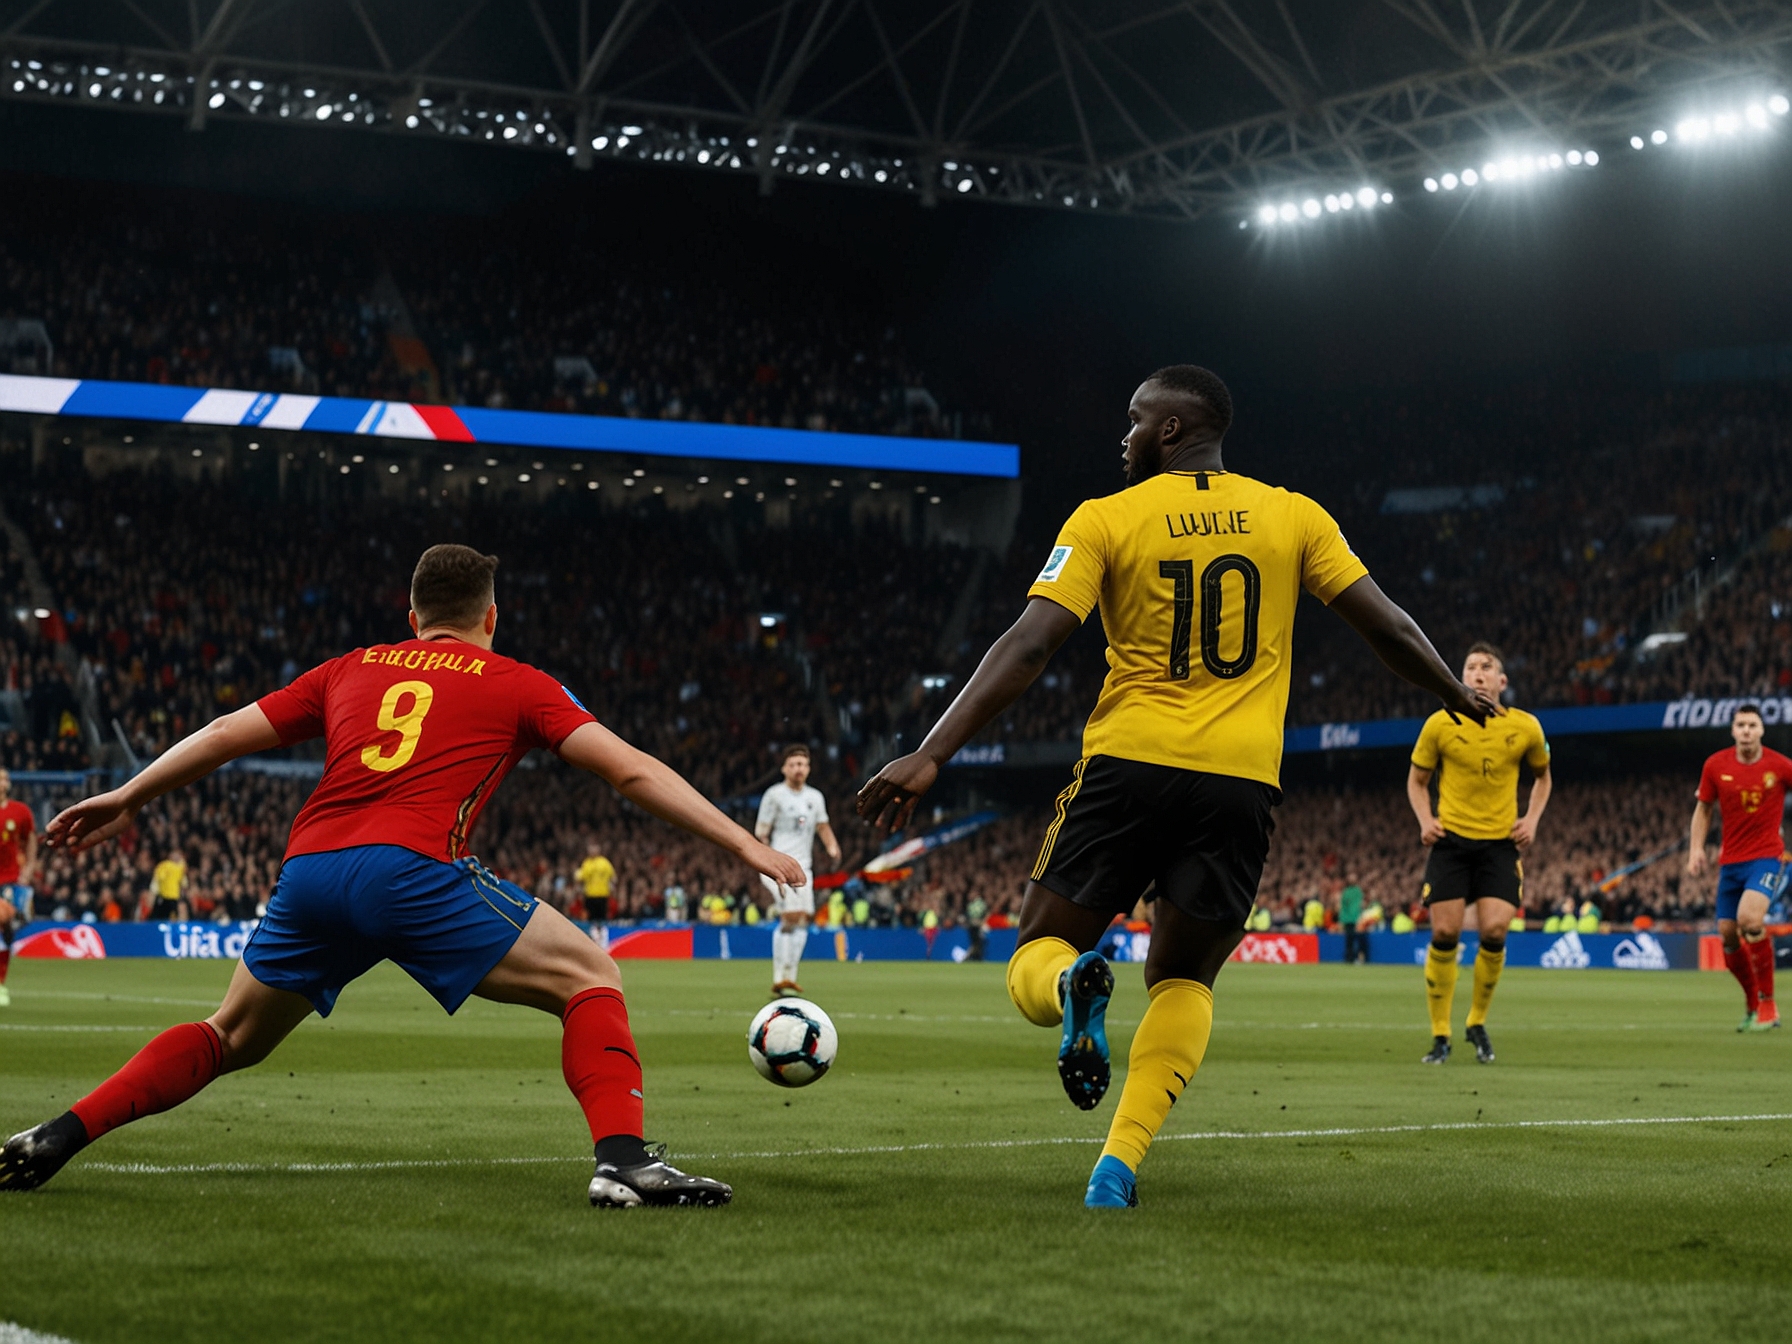 An intense moment during the Belgium vs Romania match, capturing Romelu Lukaku as he scores a goal that would later be disallowed after a VAR review for an offside position.